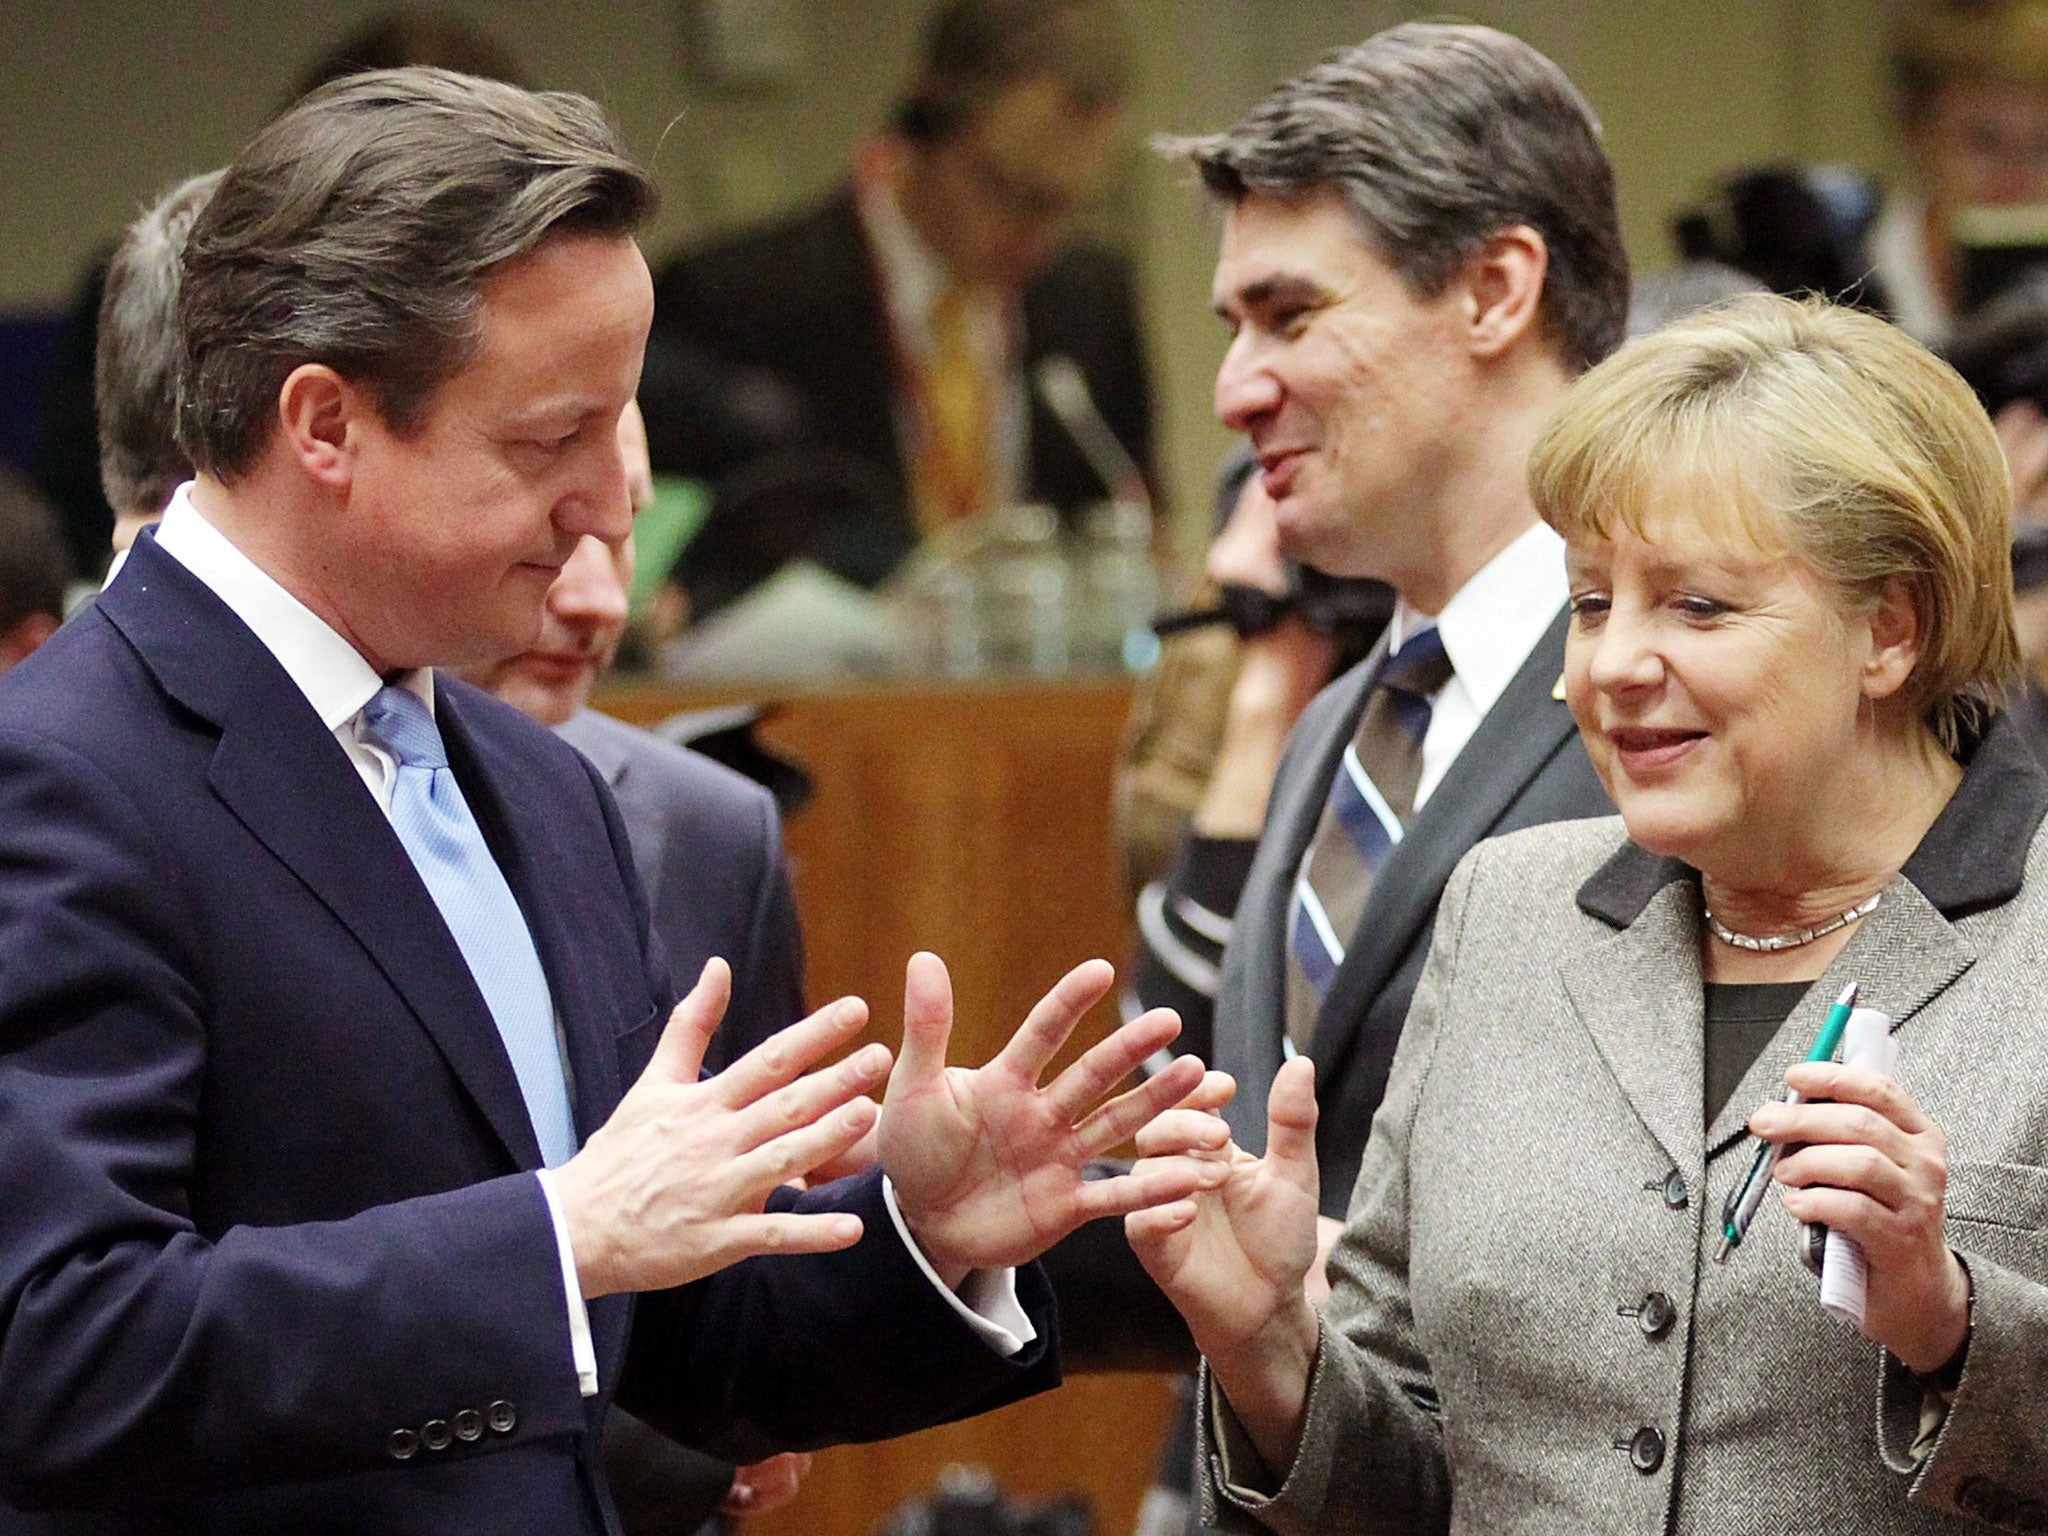 David Cameron with the German Chancellor Angela Merkel at the EU summit in Brussels